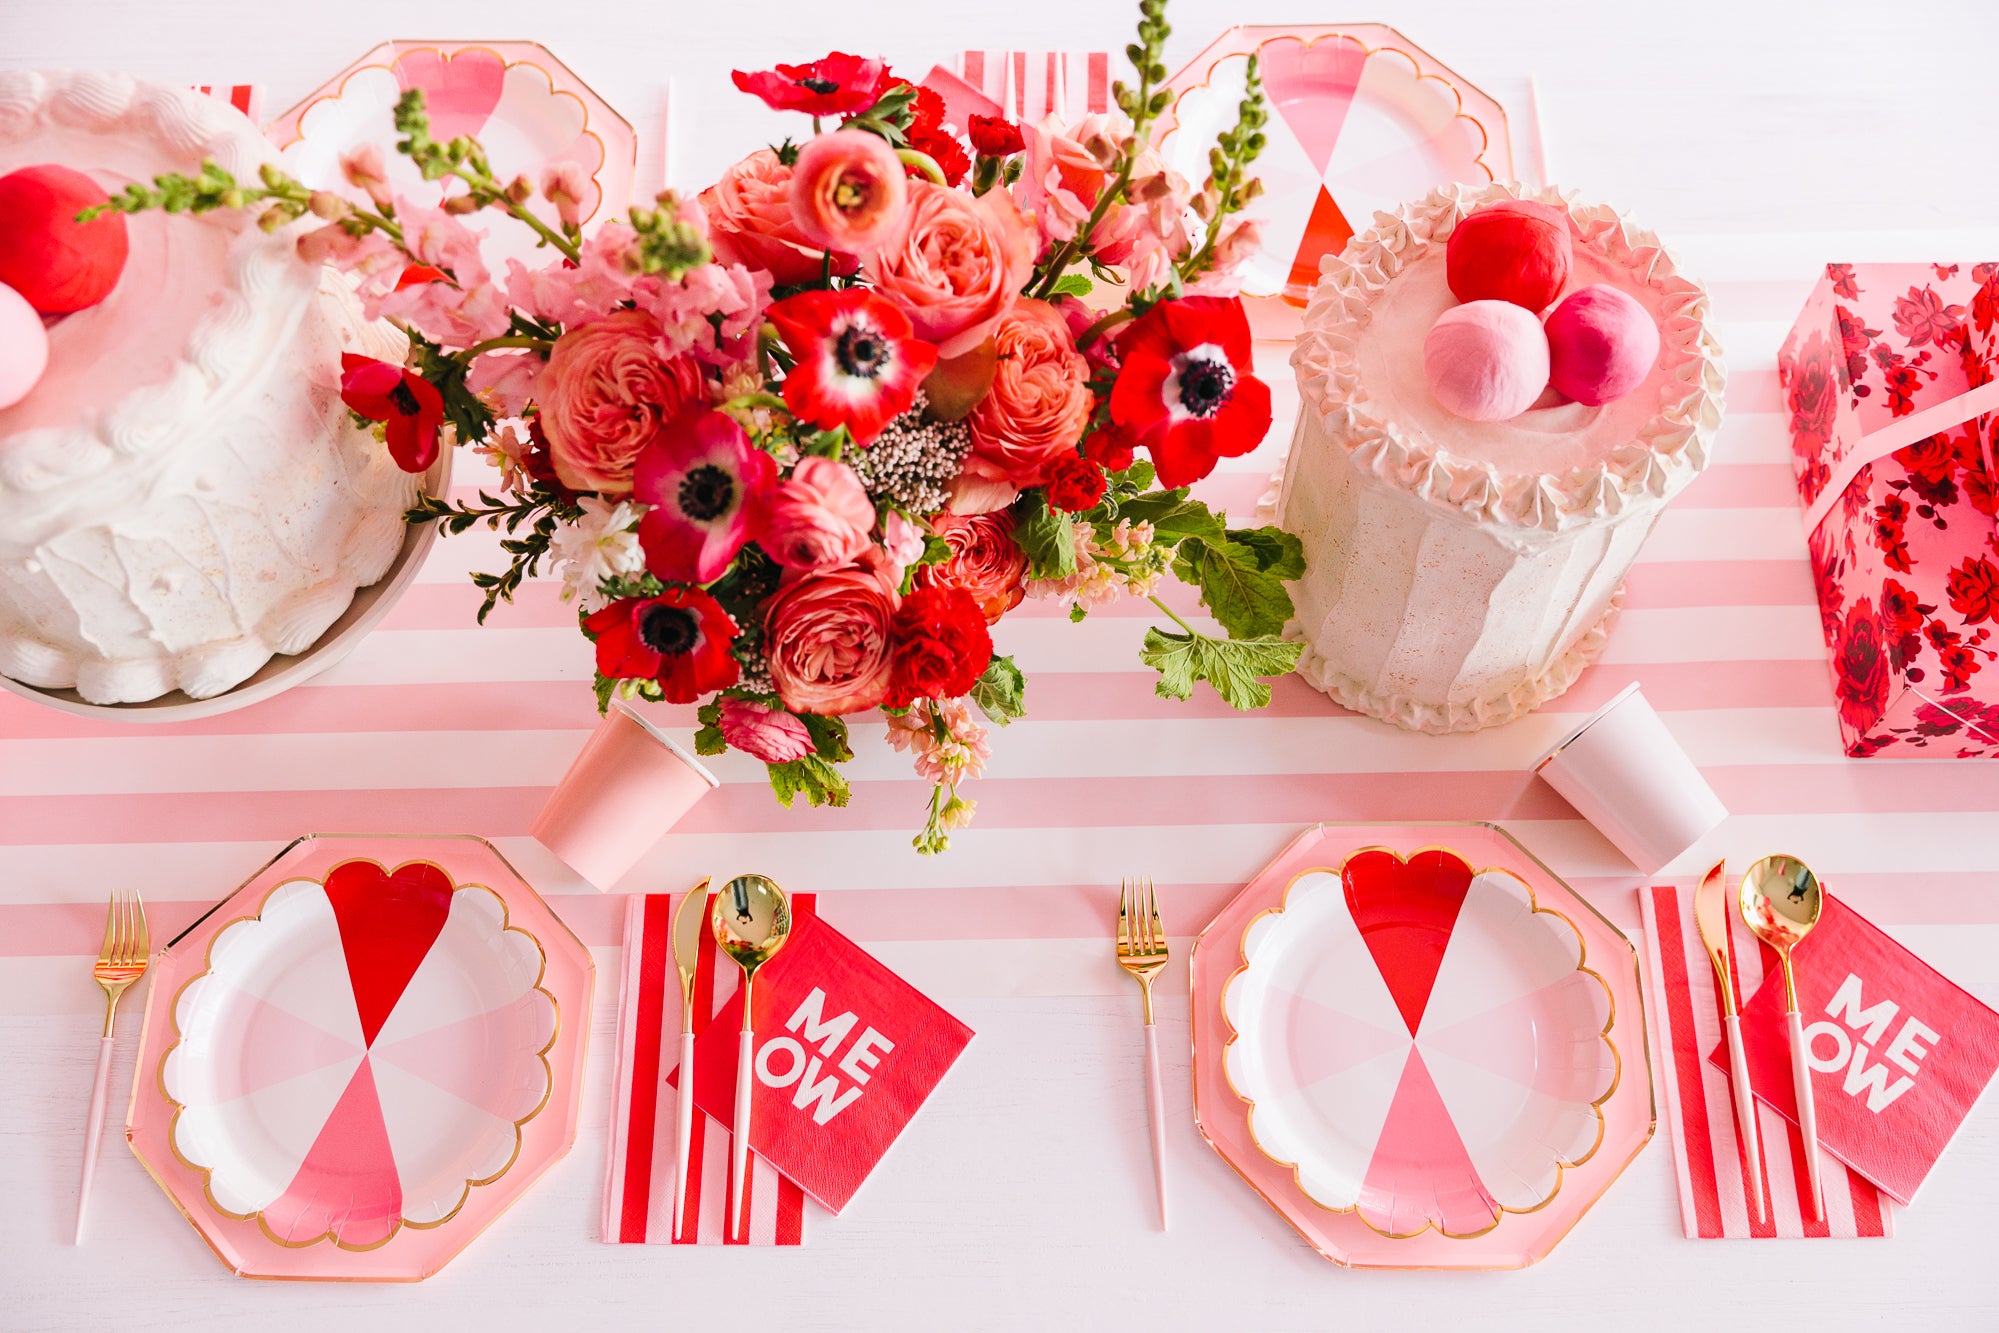 Red, pink, and peach Valentine's Day tableware